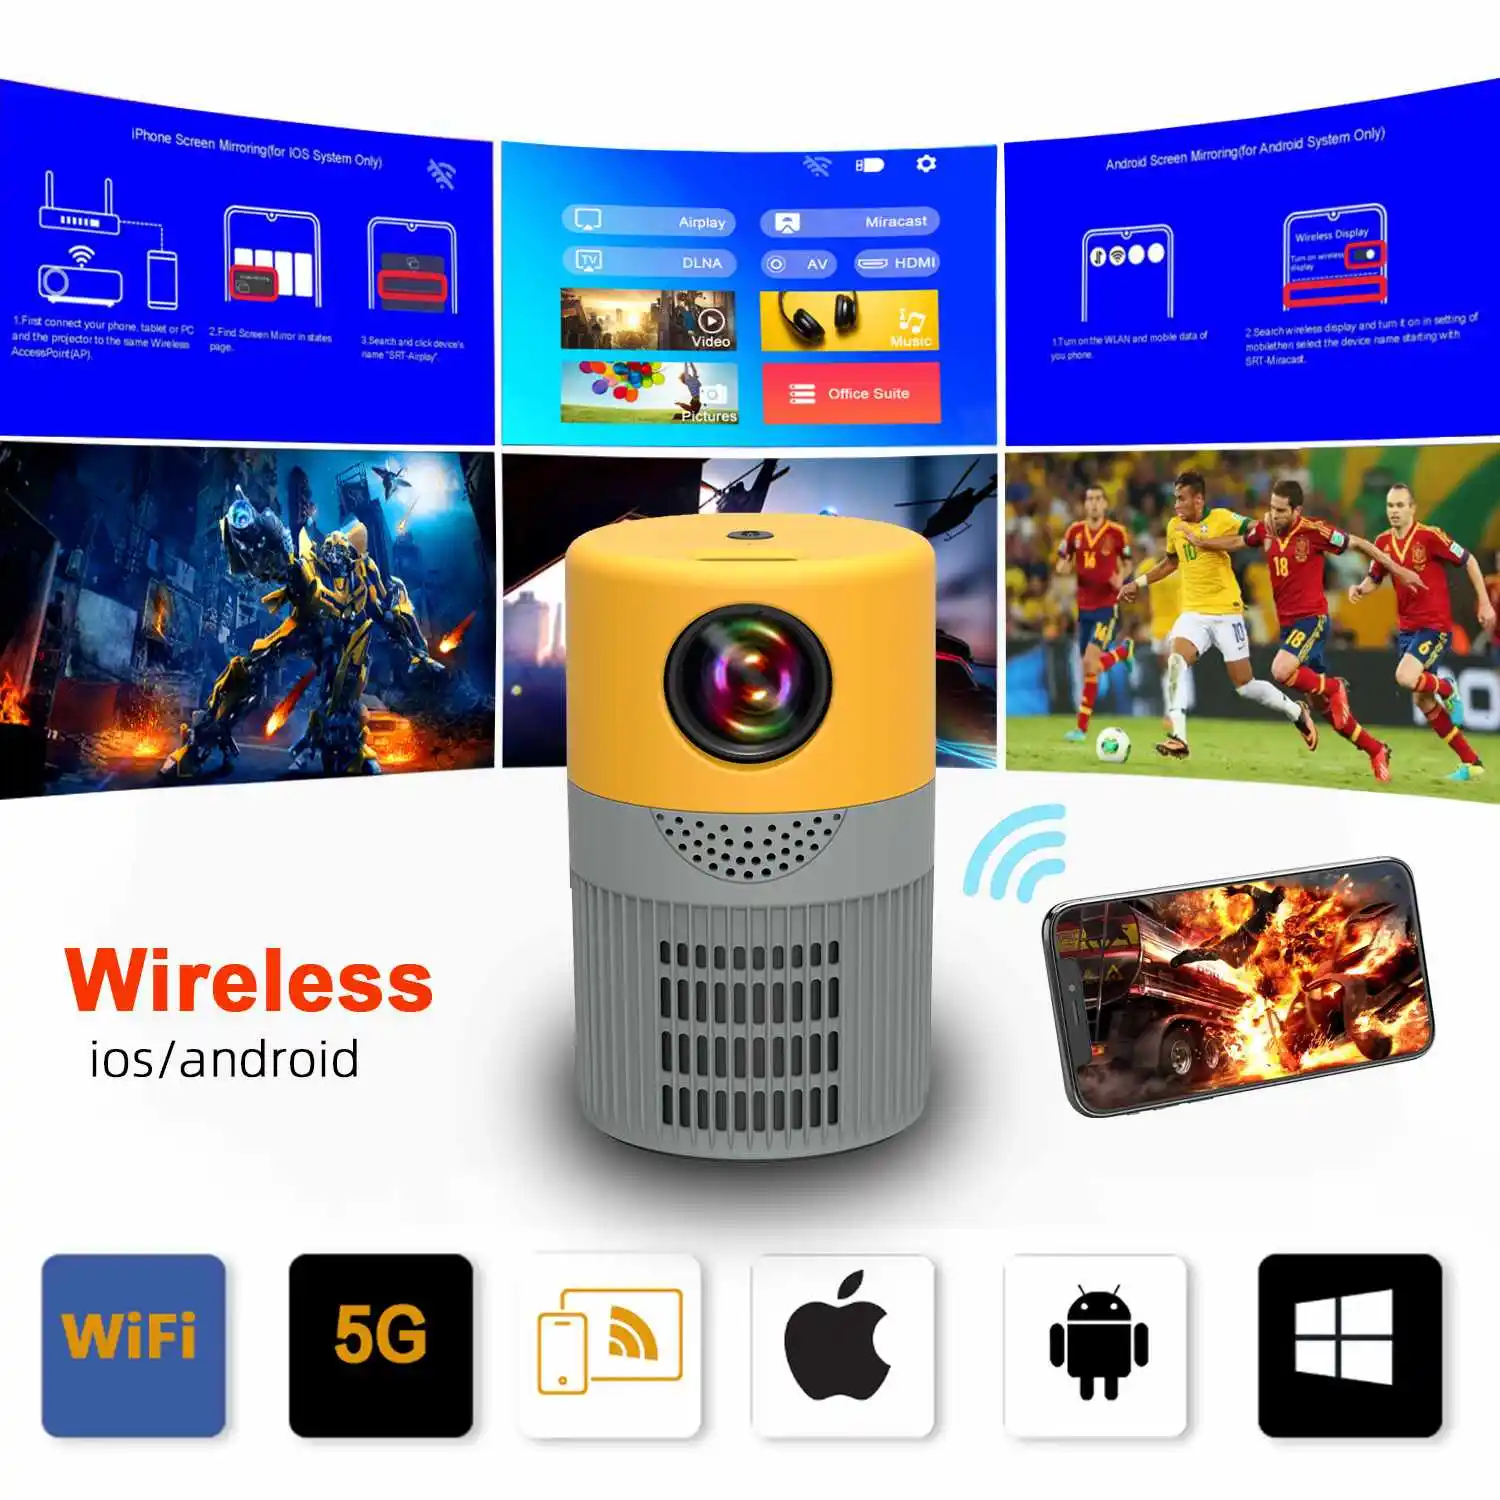 

5G WIFI Mini Projector LCD Projector Smart Home Theater Cinema,Wireless Mirroring 480P 1080P 4K Supported Portable Projectors